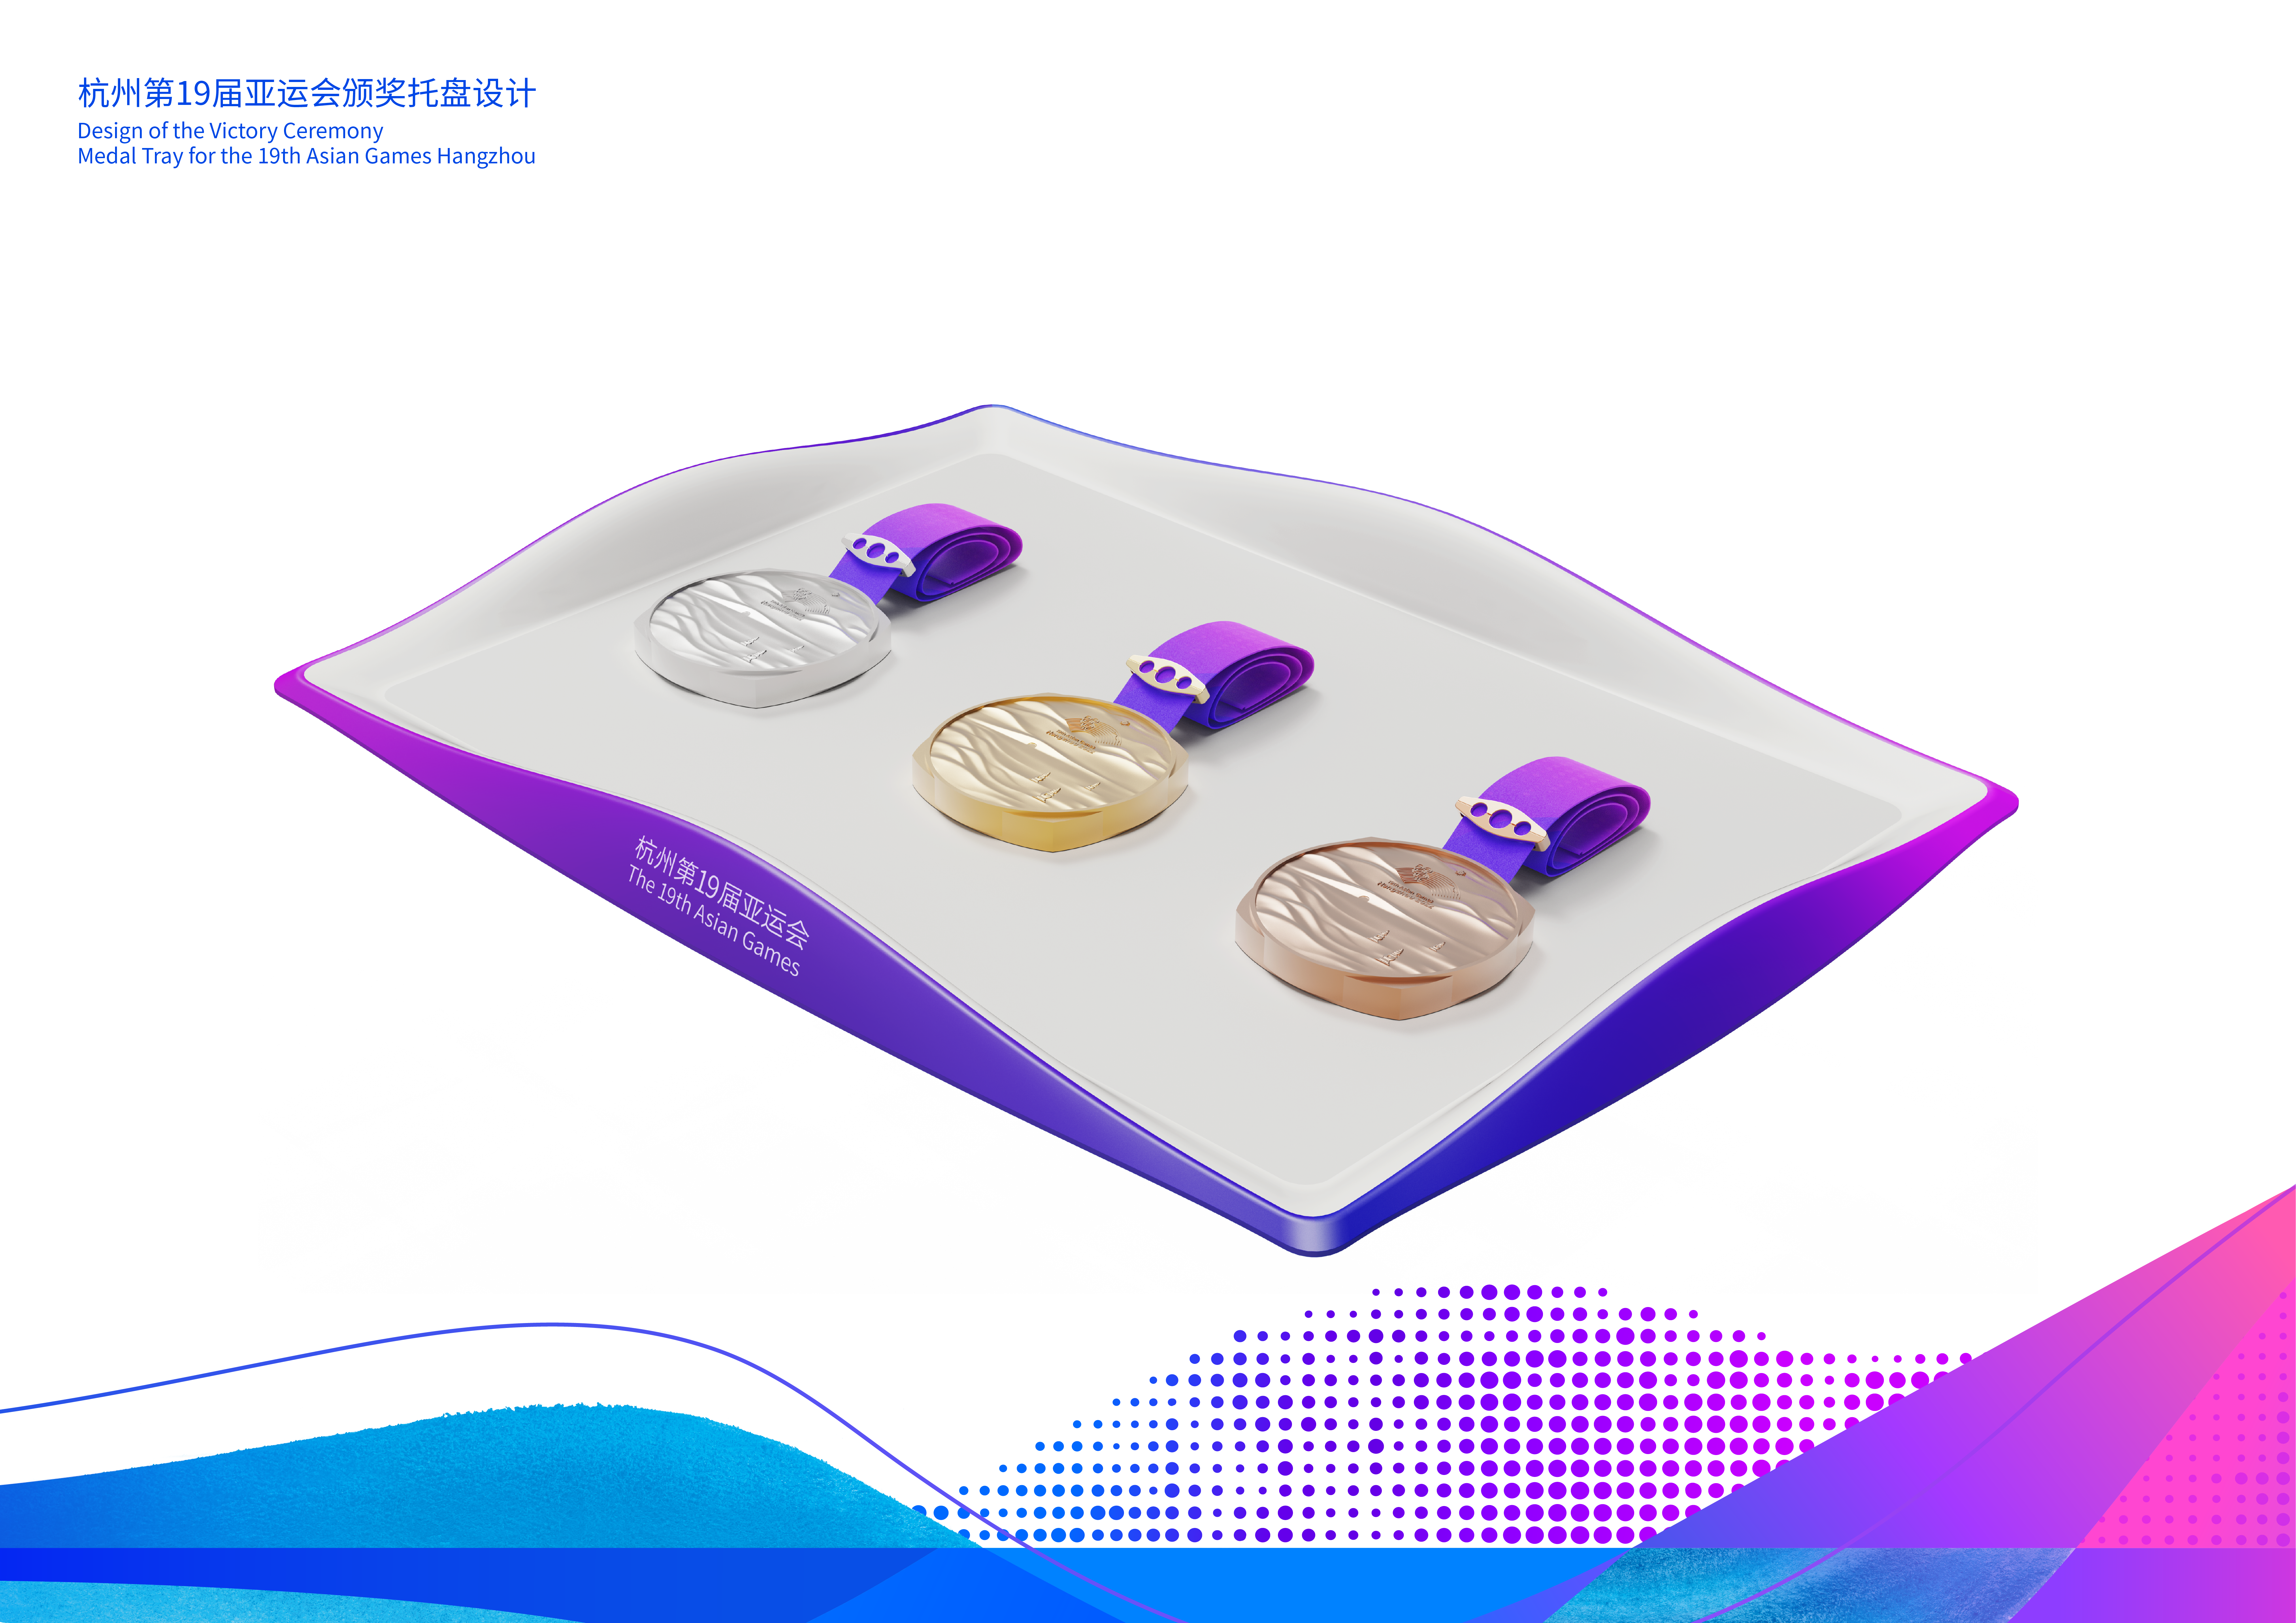 The victory ceremony medal tray design for the 19th Asian Games Hangzhou, Zhejiang Province. /19th Asian Games Hangzhou